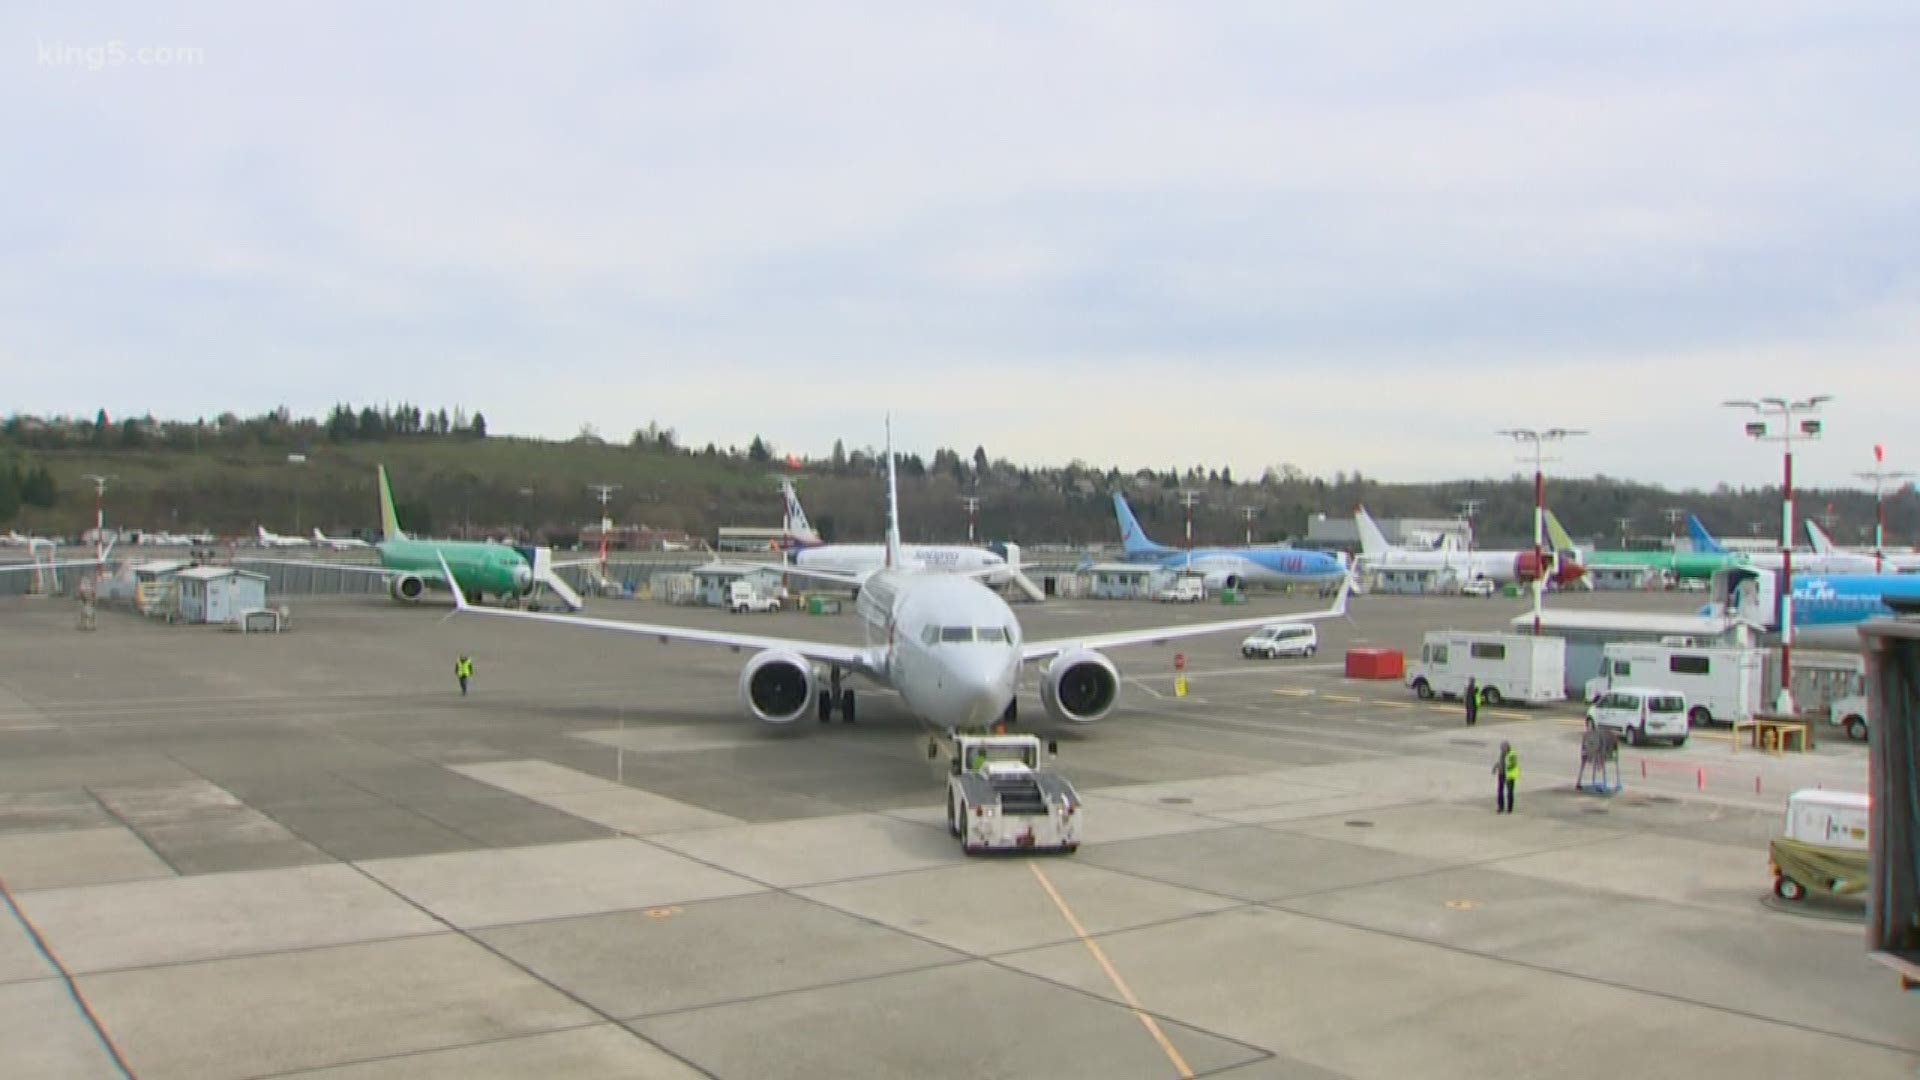 Boeing crews have made 96 flights to test a software update for its troubled 737 MAX jet. More test flights are planned in the coming weeks as the company attempts to convince regulators that the plane is safe.